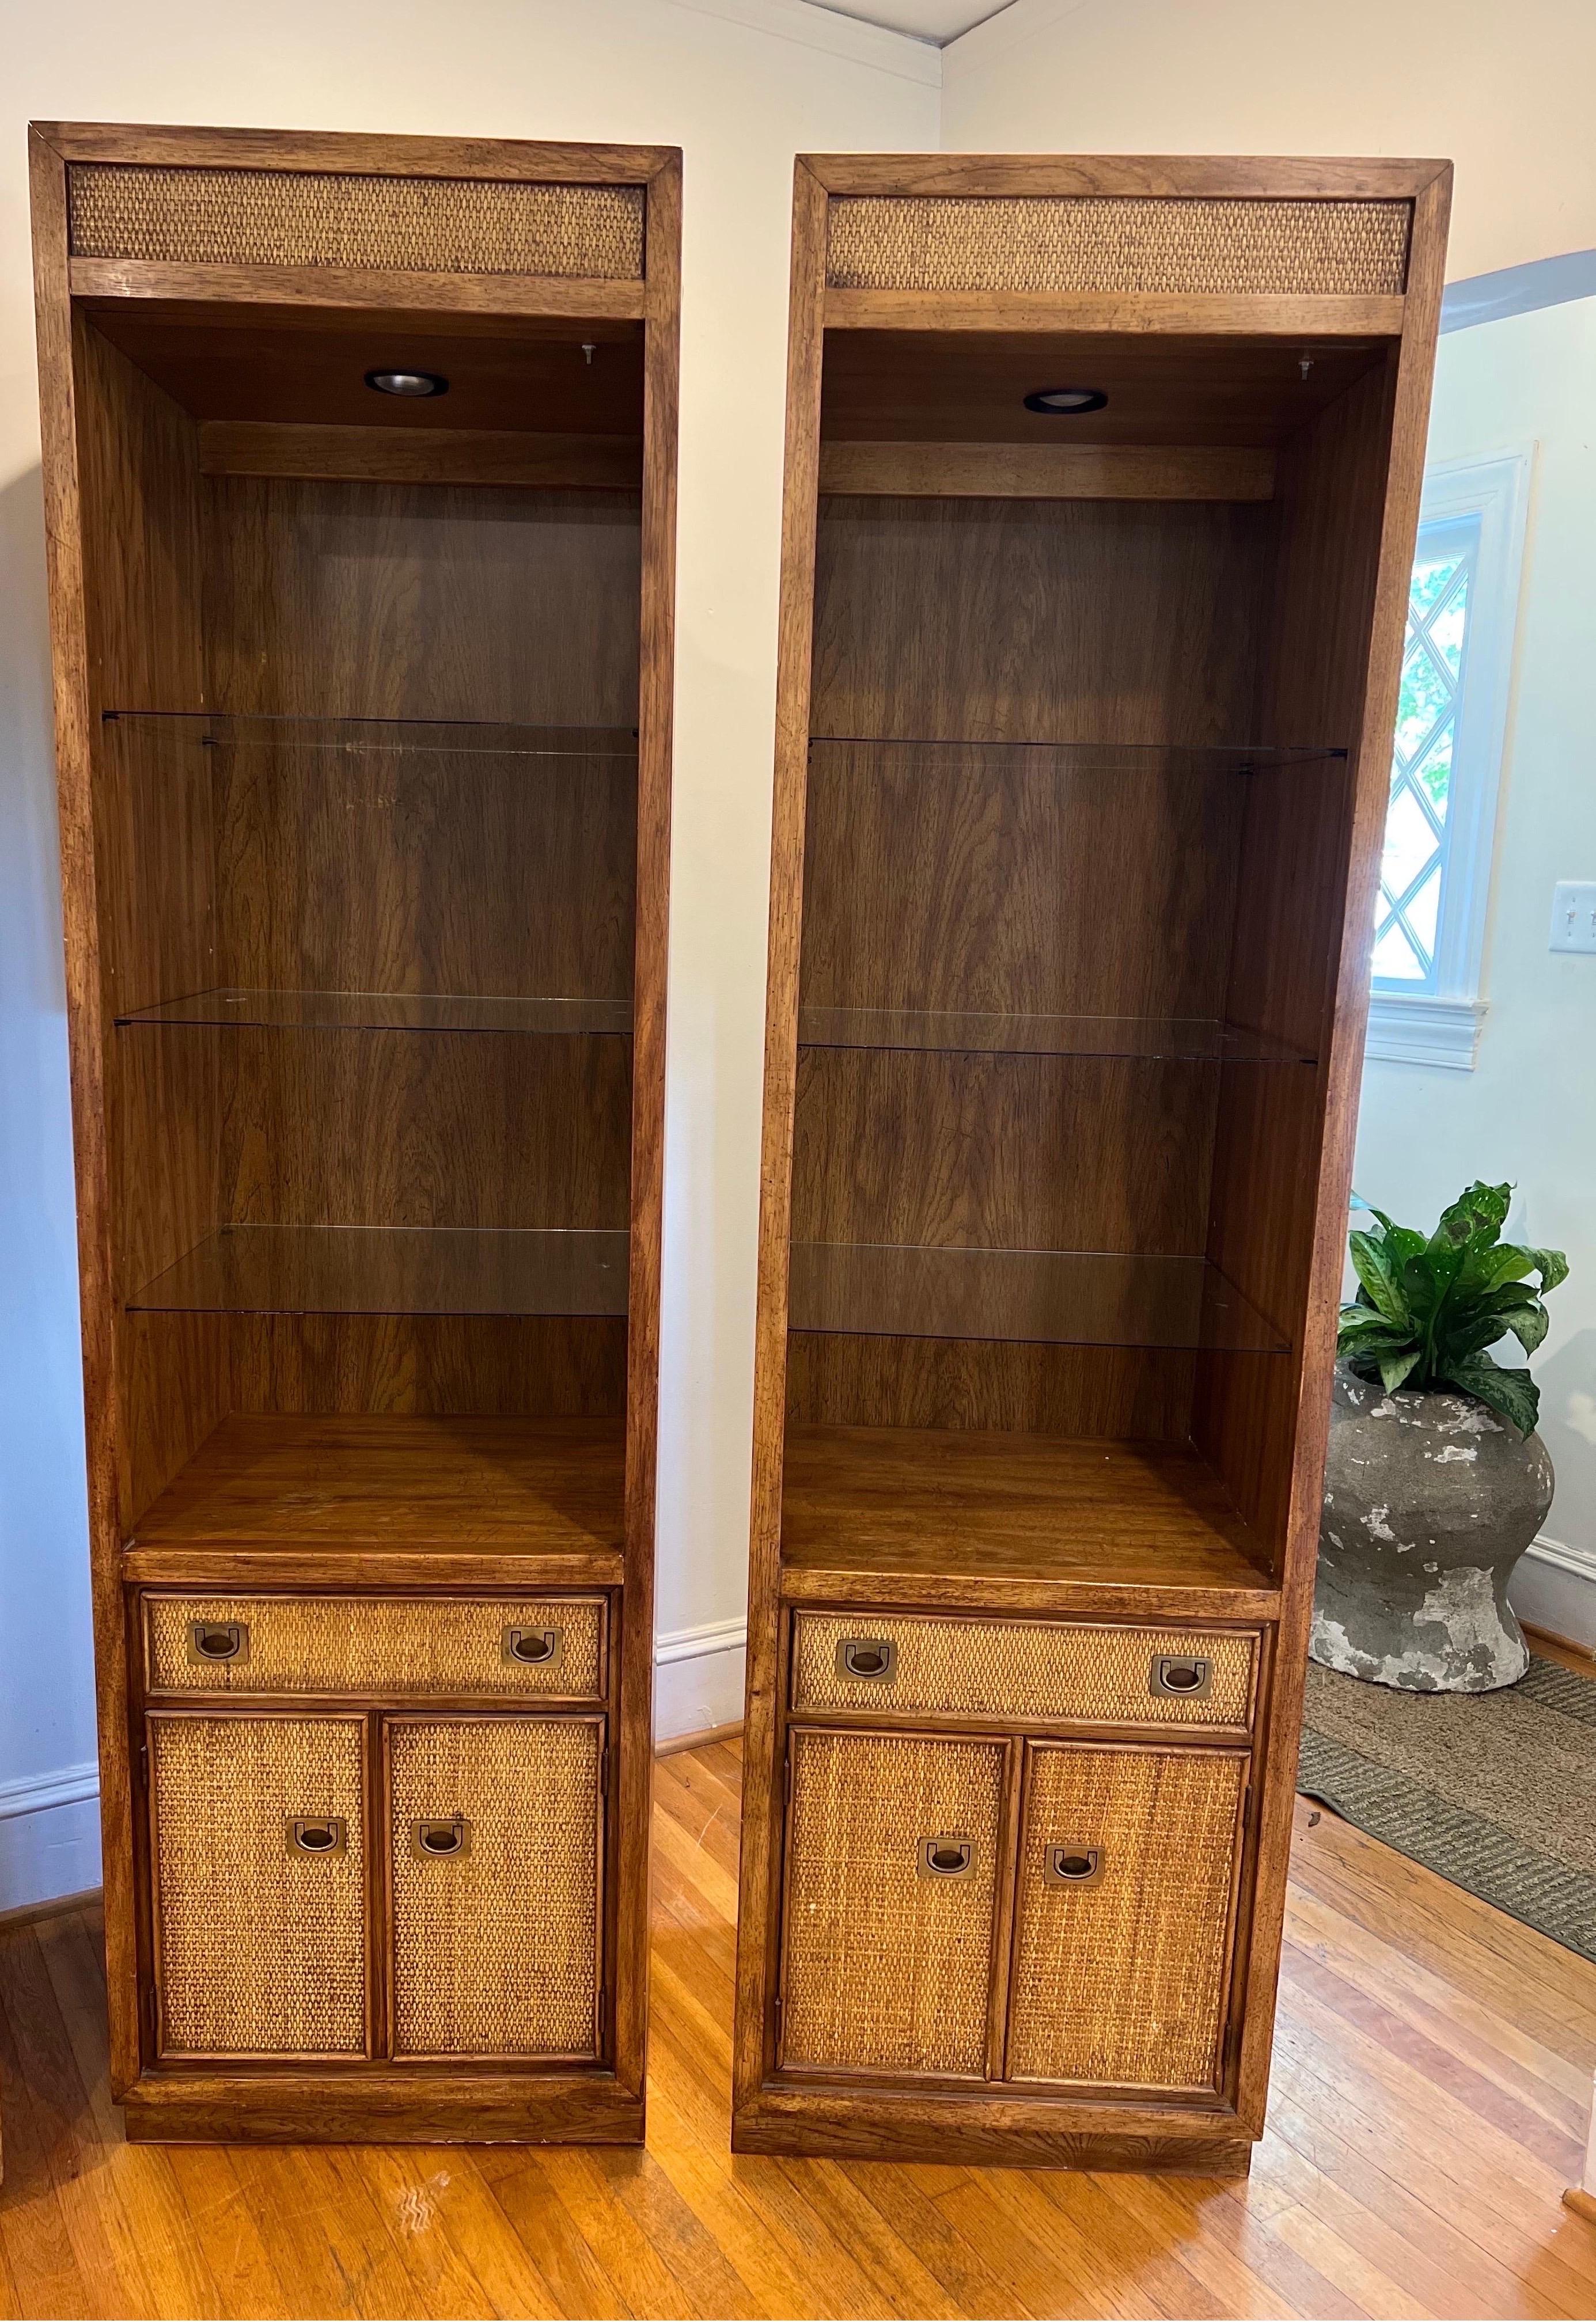 Rare pair of Mid-Century Modern Campaign style case pieces/display shelving.
Walnut frame with rattan details. 
Each has a single drawer and doors that open to an area with a shelf. 
Glass shelving. Wired for lighting, but needs repair. 

See